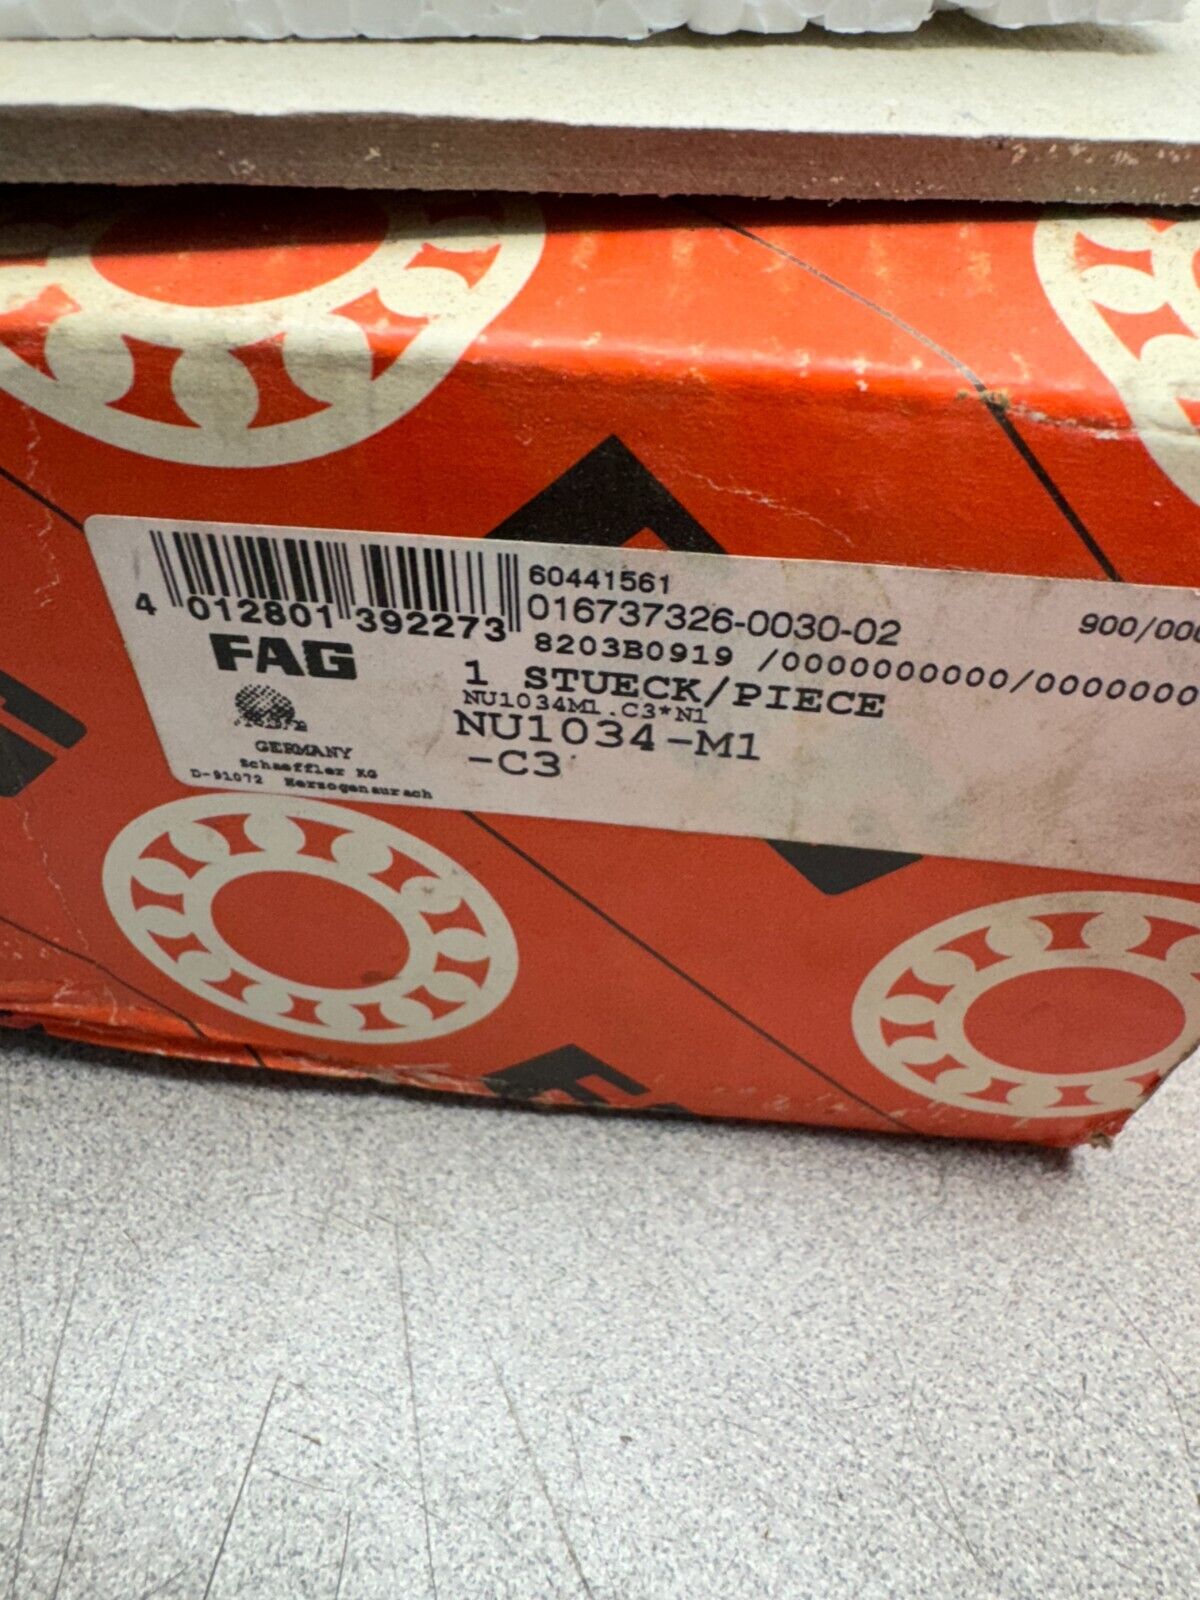 NEW IN BOX FAG NU1034-M1-C3 CYLINDRICAL ROLLER BEARING NU1034M1.C3